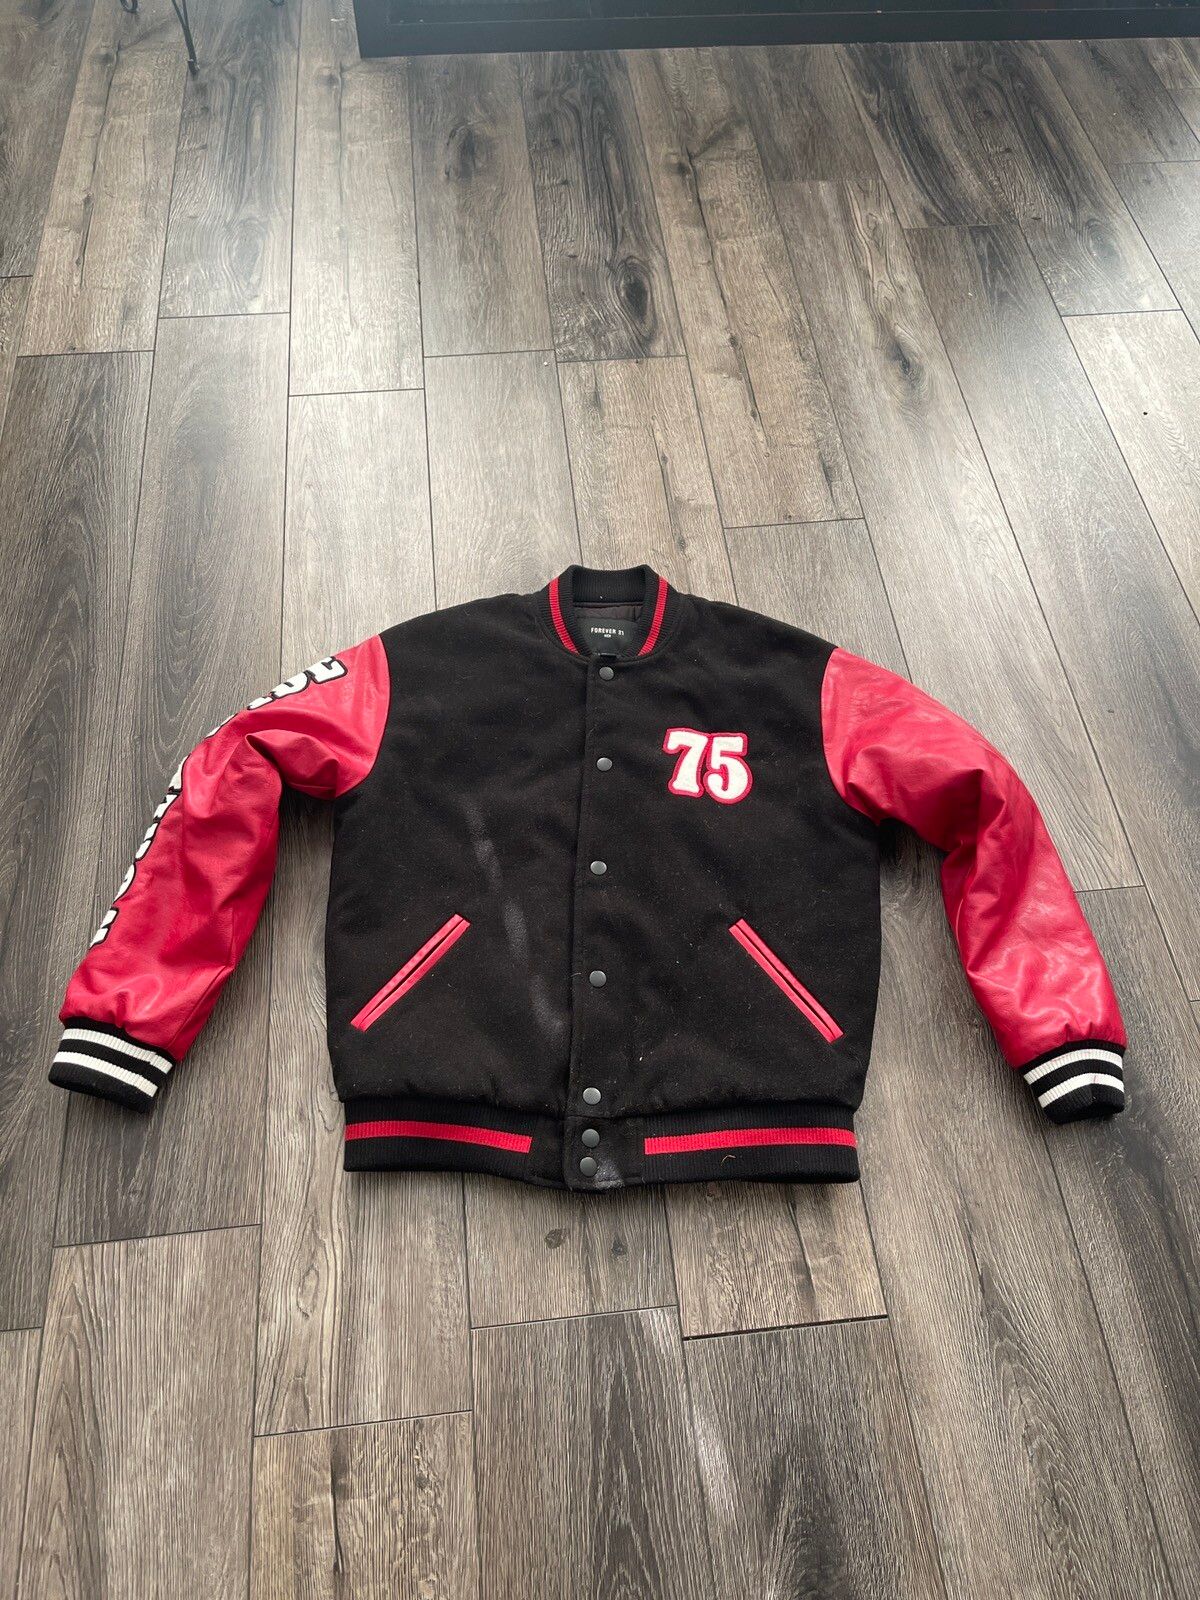 Forever 21 Varsity jacket Size US S / EU 44-46 / 1 - 1 Preview